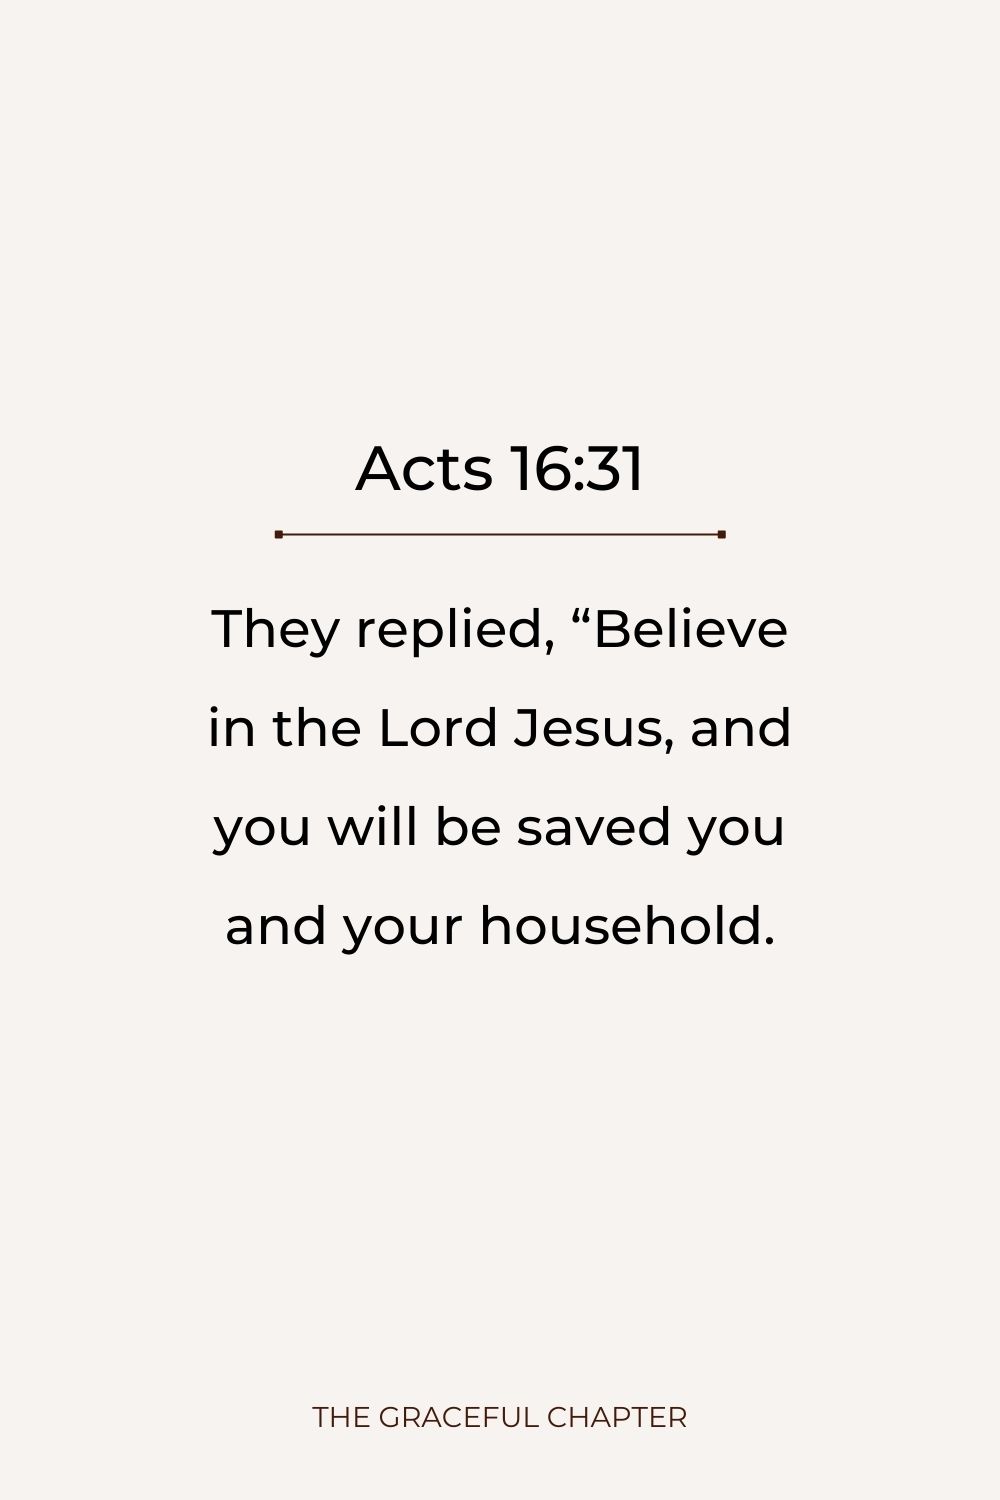 They replied, “Believe in the Lord Jesus, and you will be saved you and your household. Acts 16:31